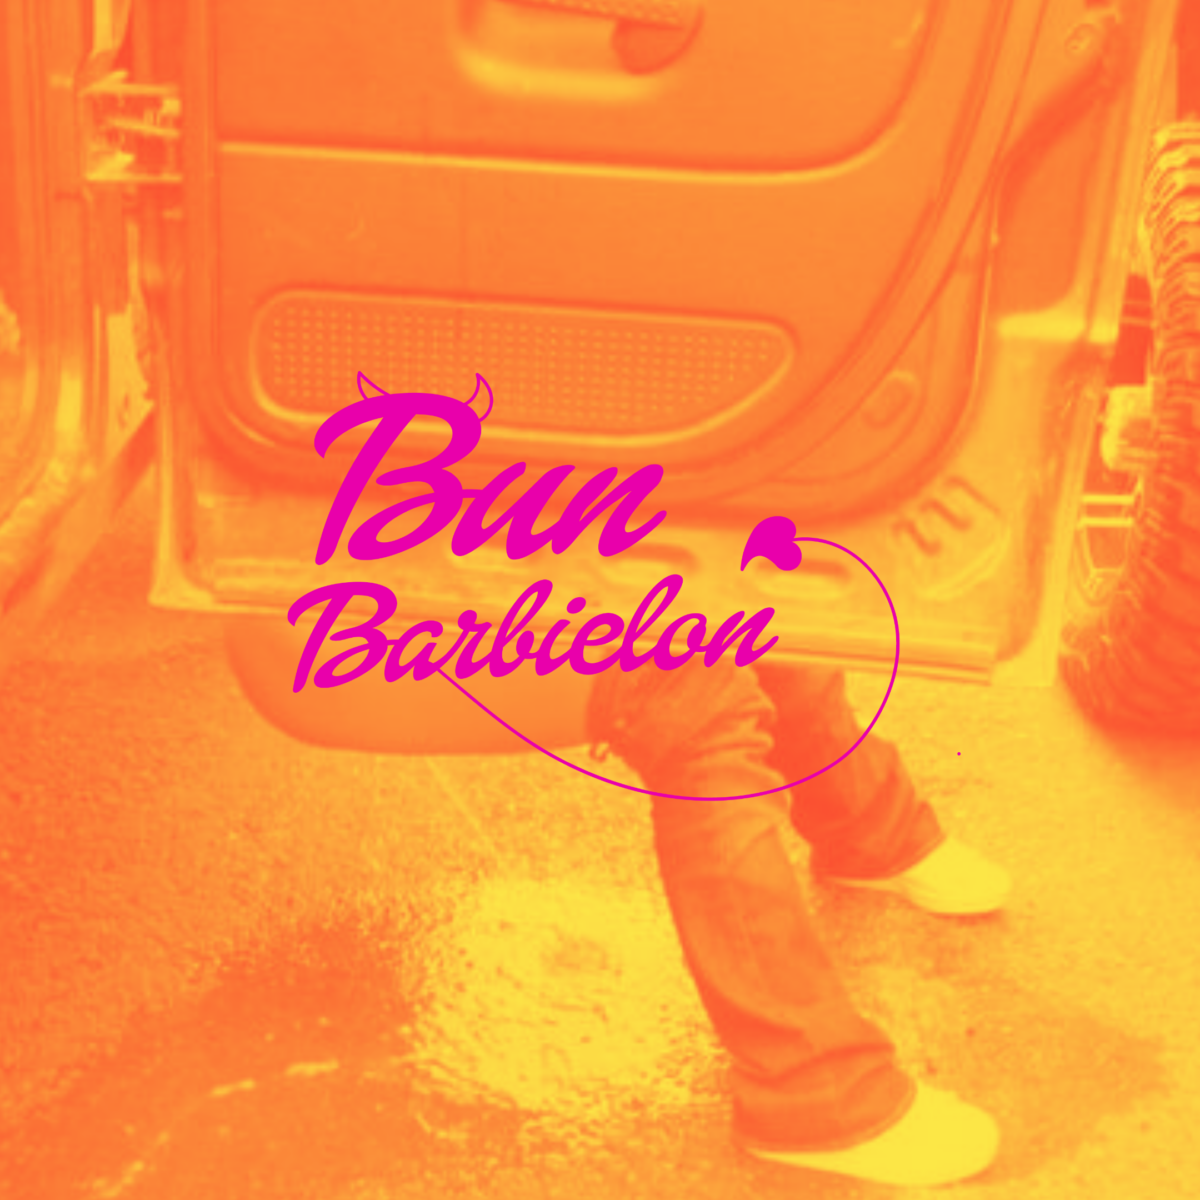 A person crouches behind a car door to urinate, their jeans round their knees. Text over the top reads Bun Barbielon